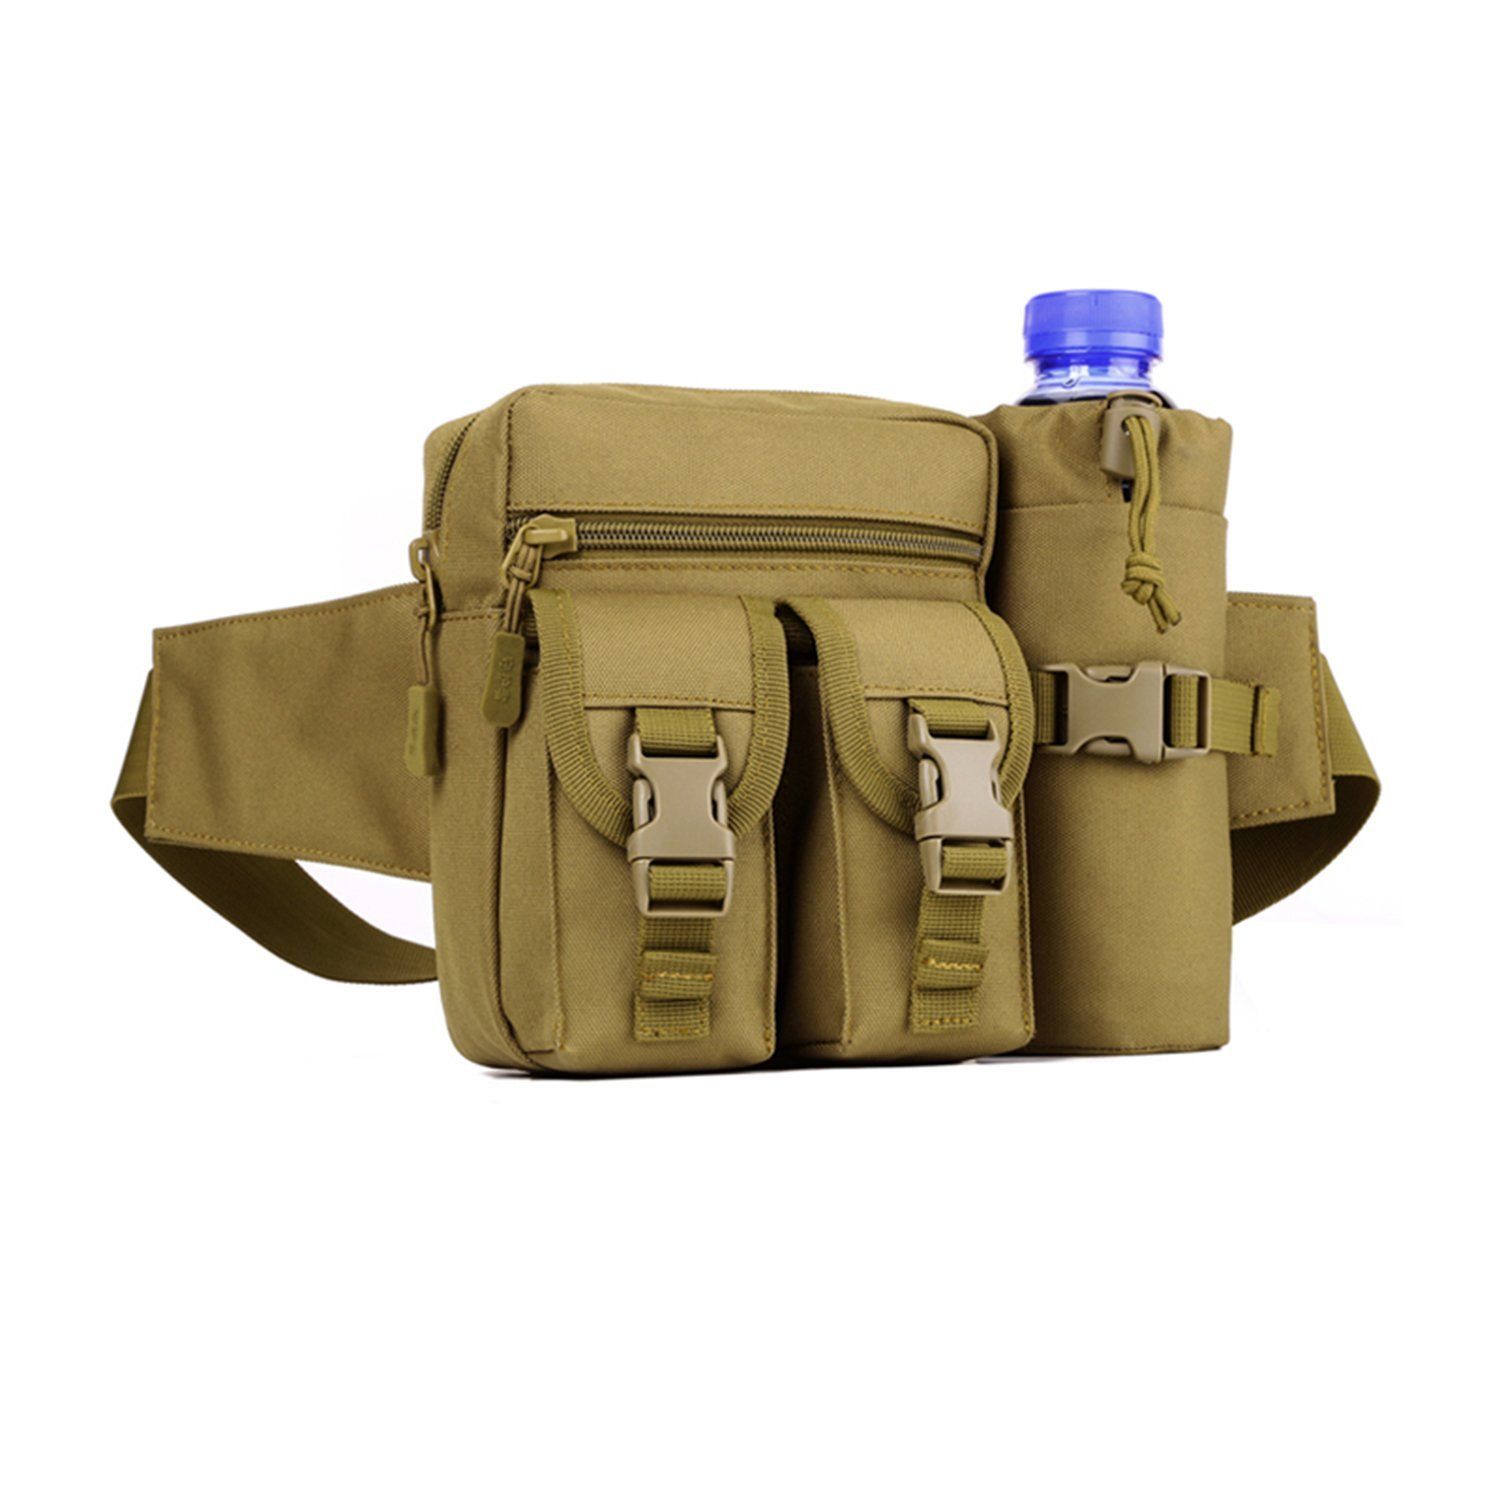 Water Bottle Holder Military Waist Bag, Outdoor Sports Nylon Tactical Fanny Pack Travelling ...